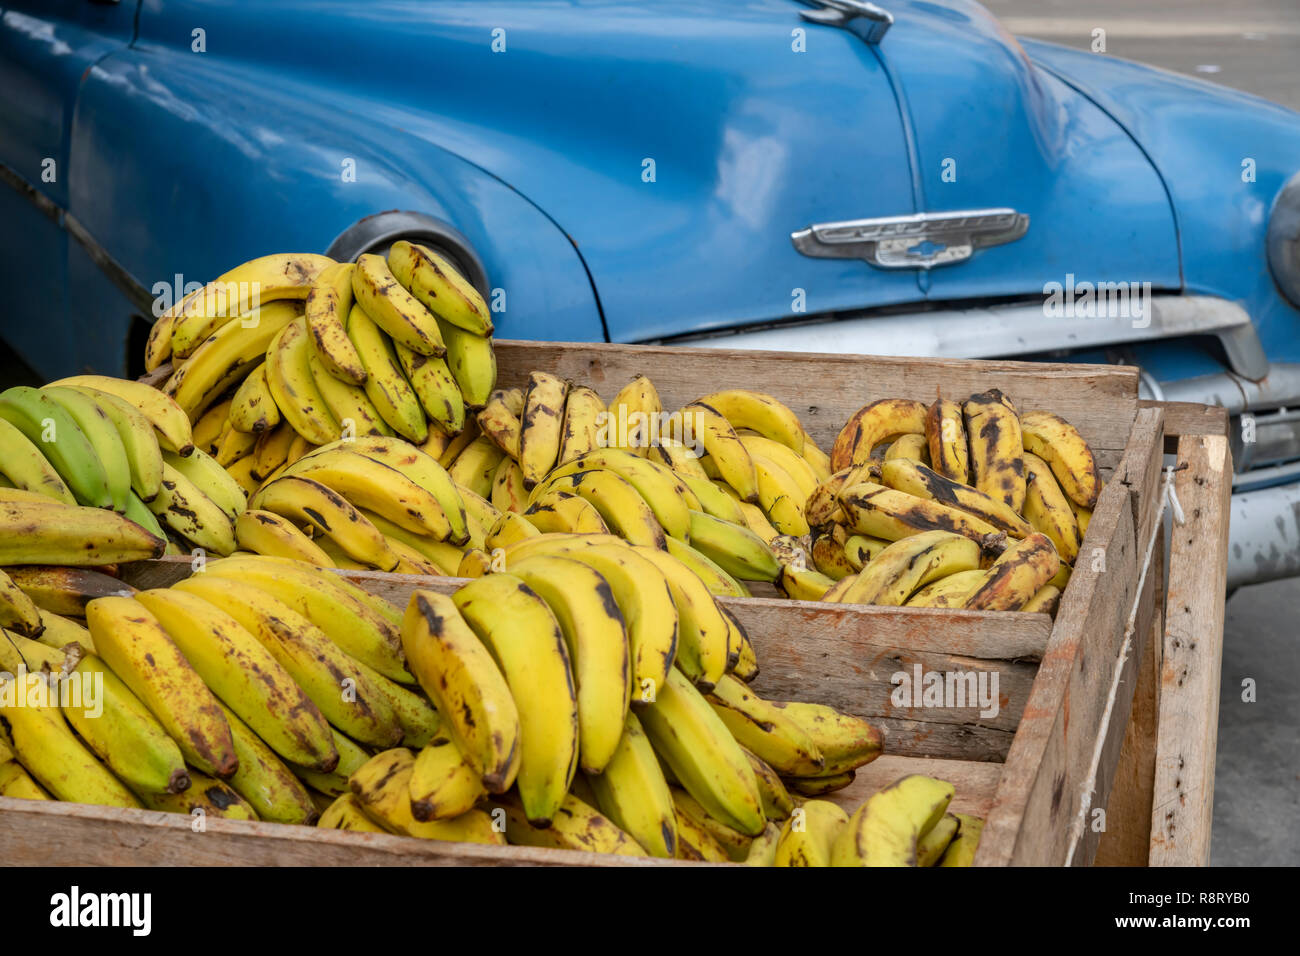 Crates of bananas for sale in front of old blue American Chevrolet car, on the corner of Lugareño and Ayestarán streets in Havana, Cuba. Stock Photo